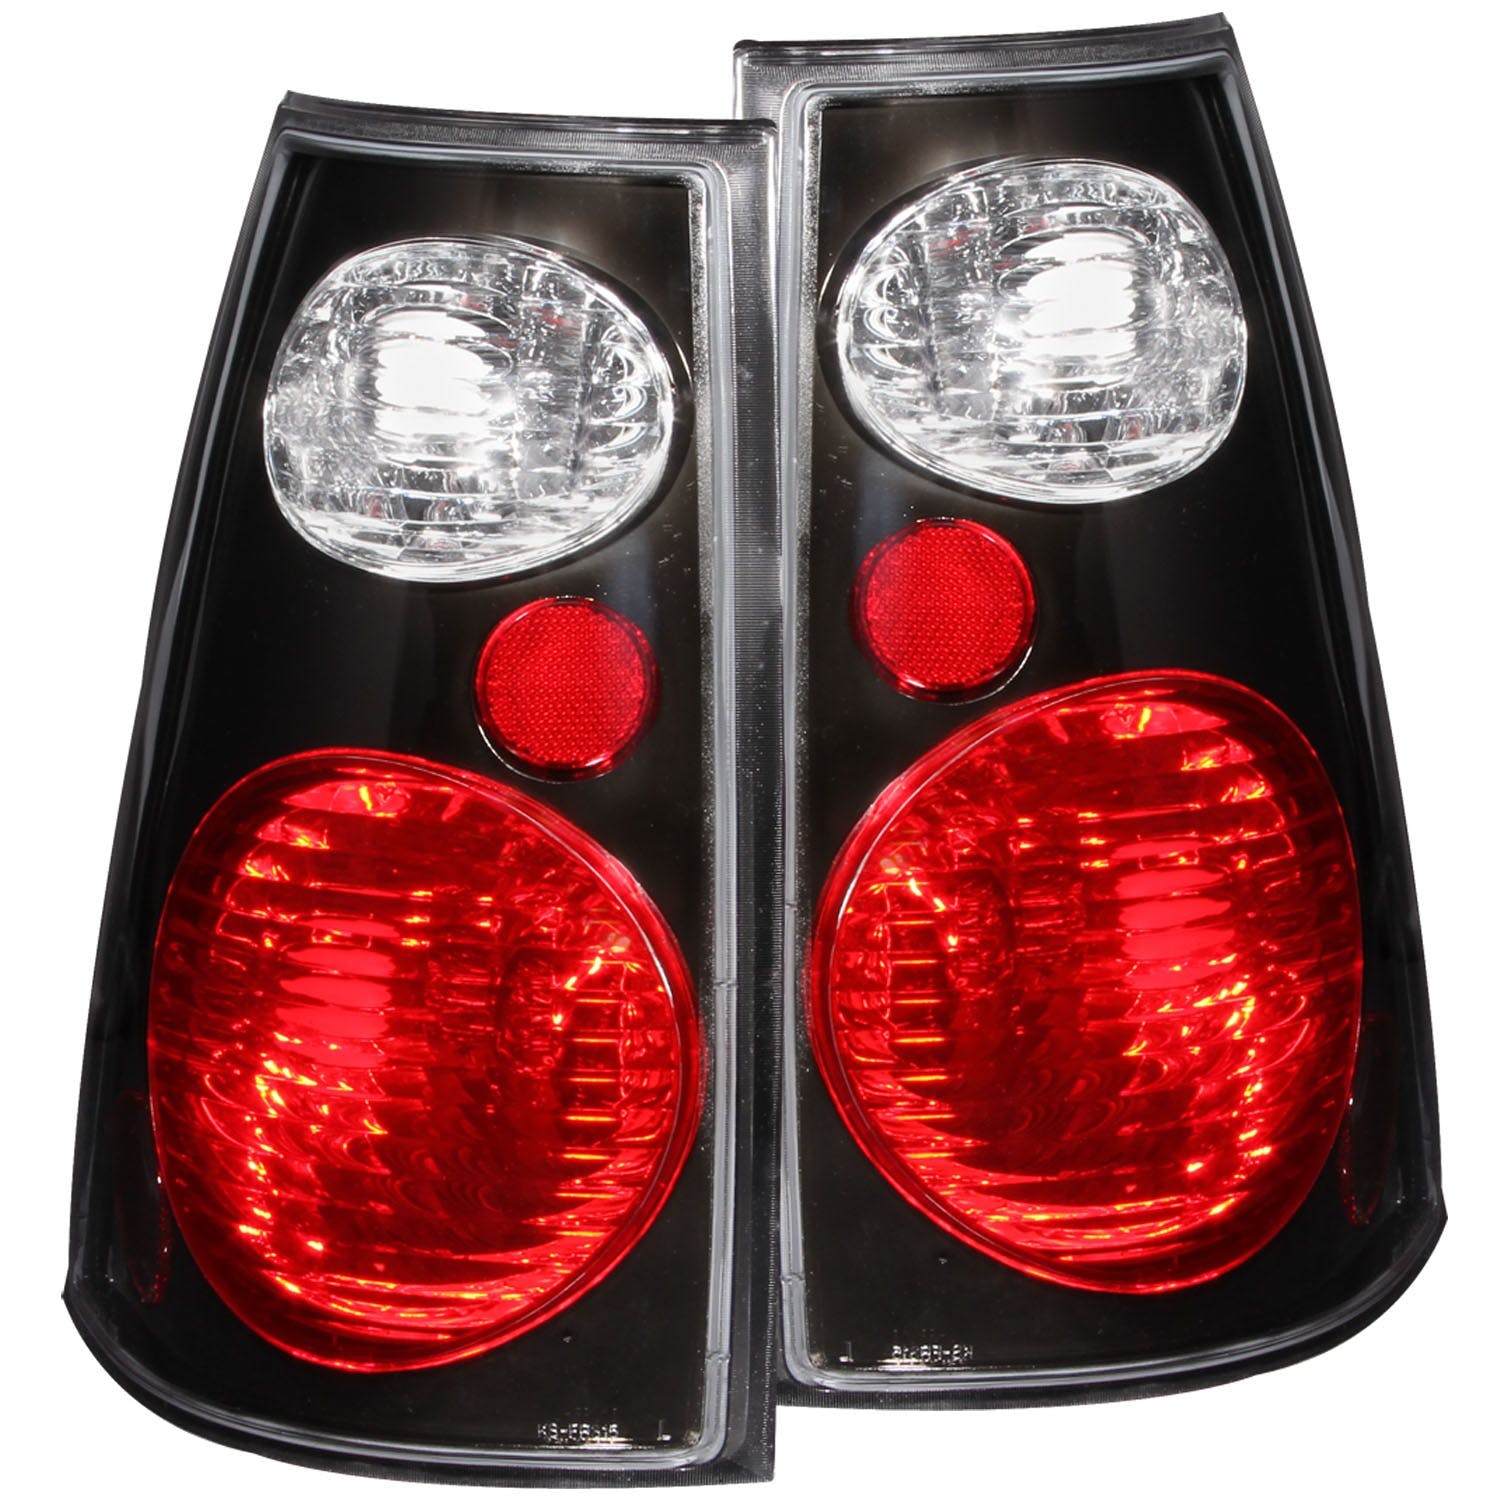 AnzoUSA 211087 Taillights Black